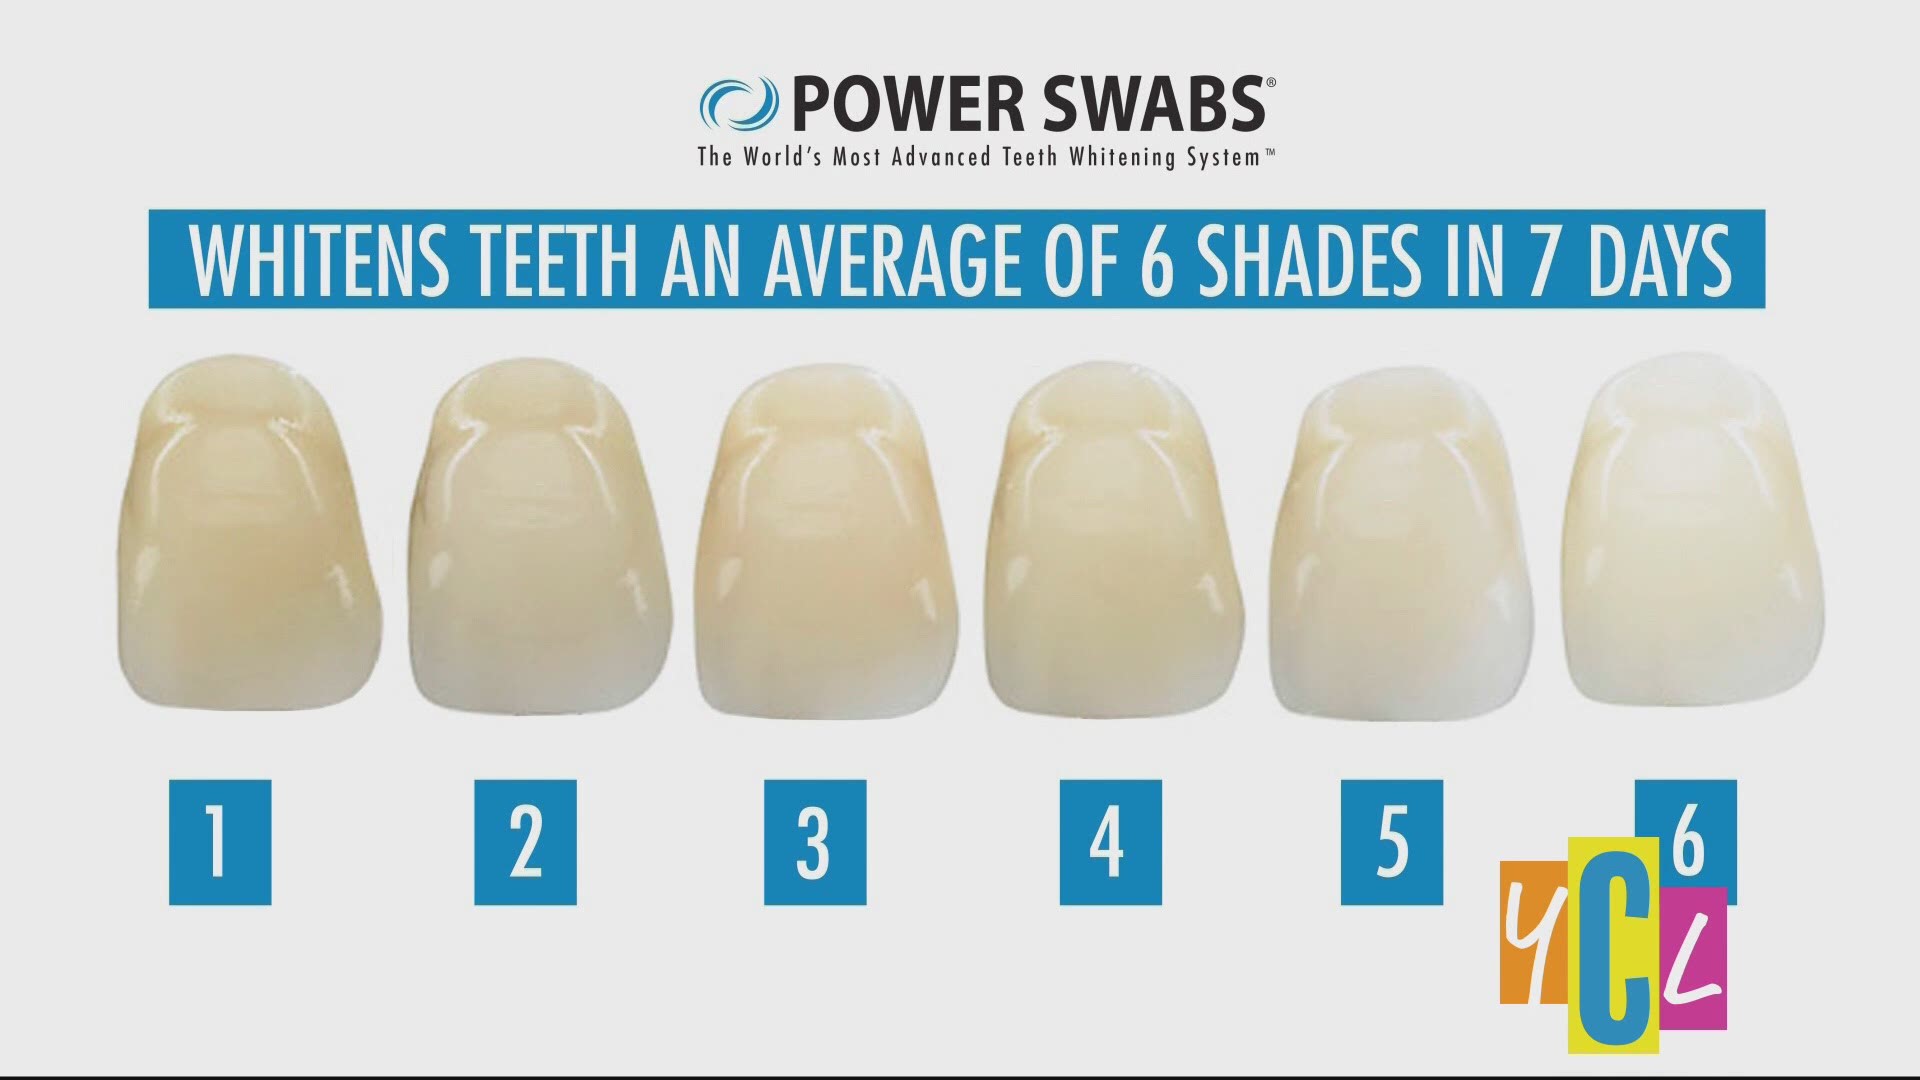 Learn how Power Swabs can help you brighten your smile throughout the year. The following is a paid segment sponsored by True Earth Health Solutions.